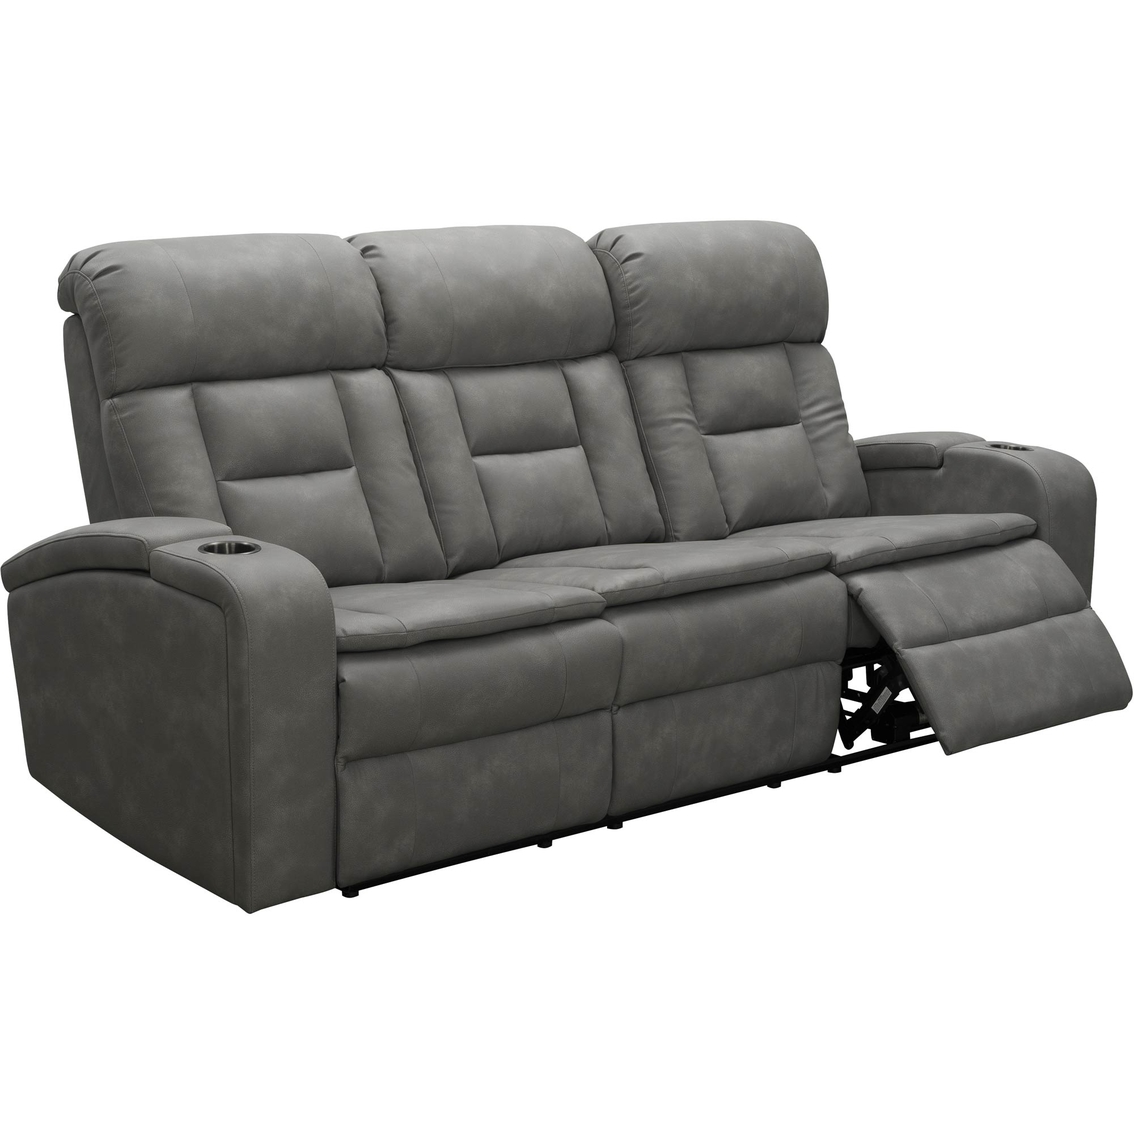 Abbyson Henley Triple Power Reclining Sofa with iTable - Image 2 of 8